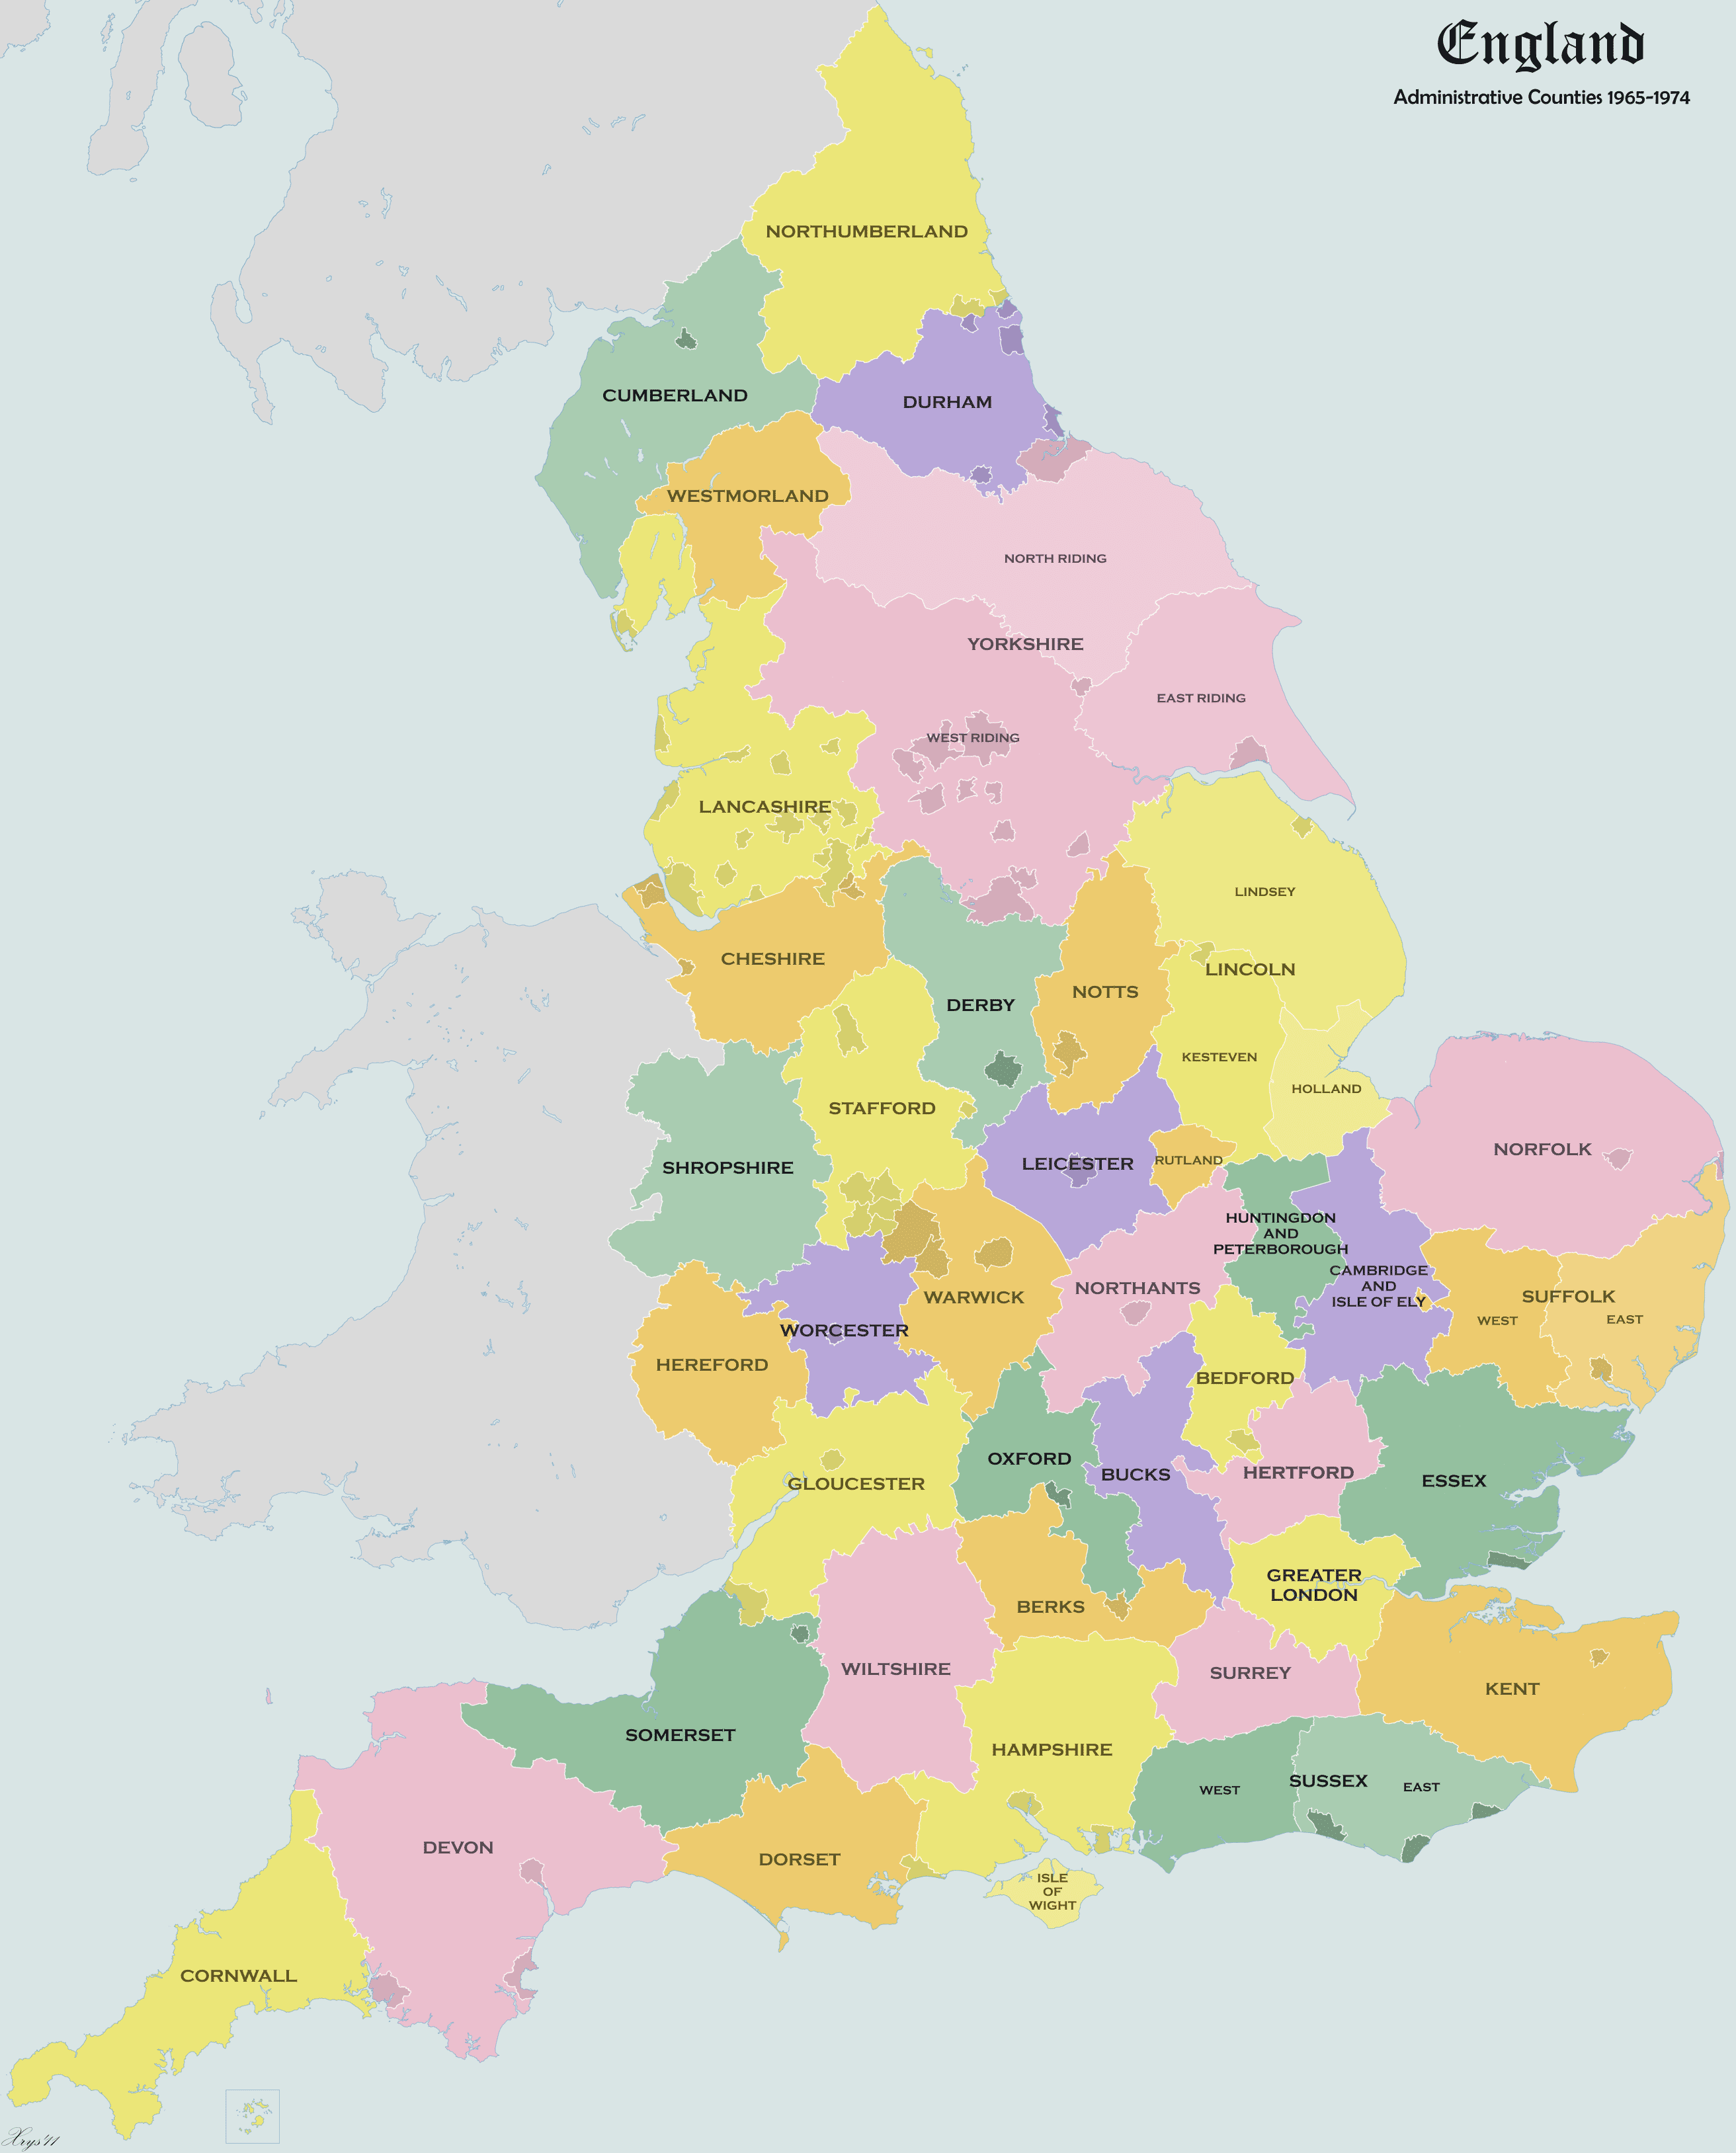 8-of-the-Biggest-Counties-in-the-UK-by-Area